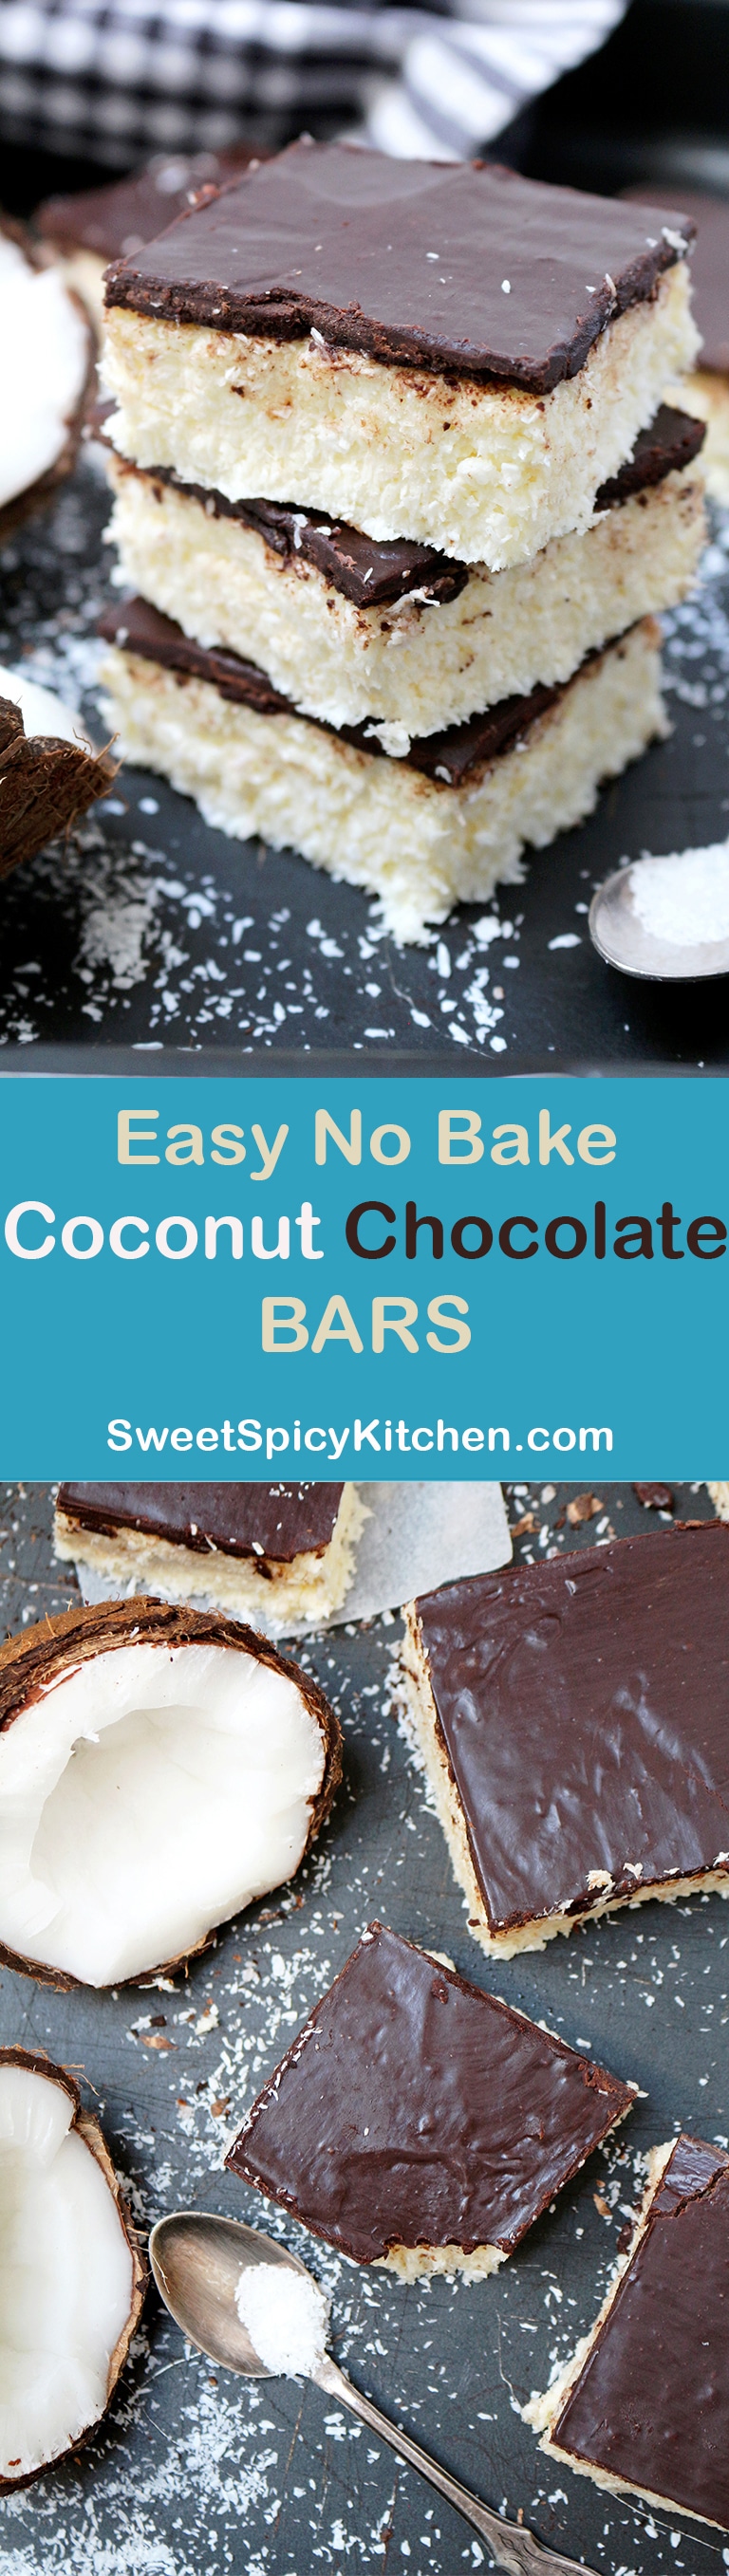 Easy No Bake Coconut Chocolate Bars super quick and delicious bars you will love. Light and refreshing, melt in your mouth dessert perfect for hot summer days